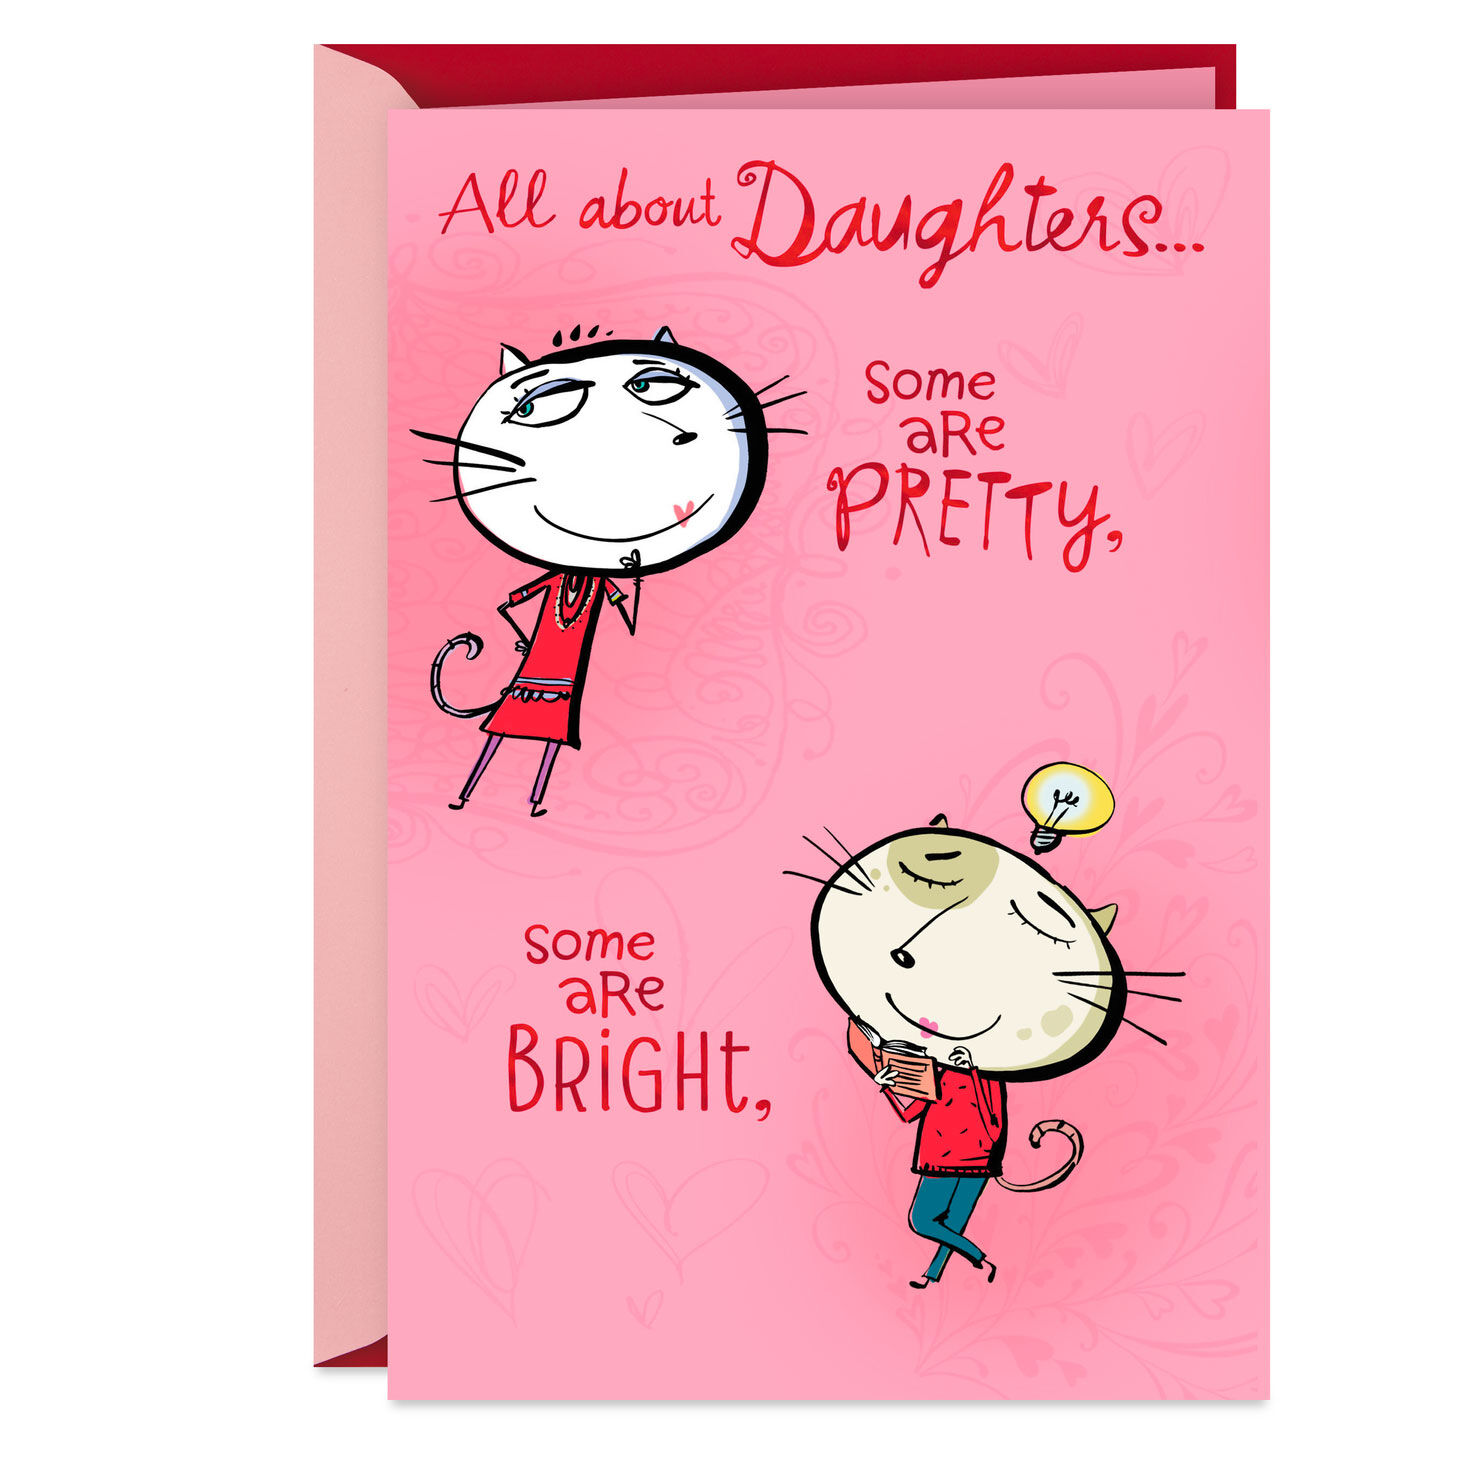 All In One Funny Pop-Up Valentine's Day Card for Daughter for only USD 5.59 | Hallmark